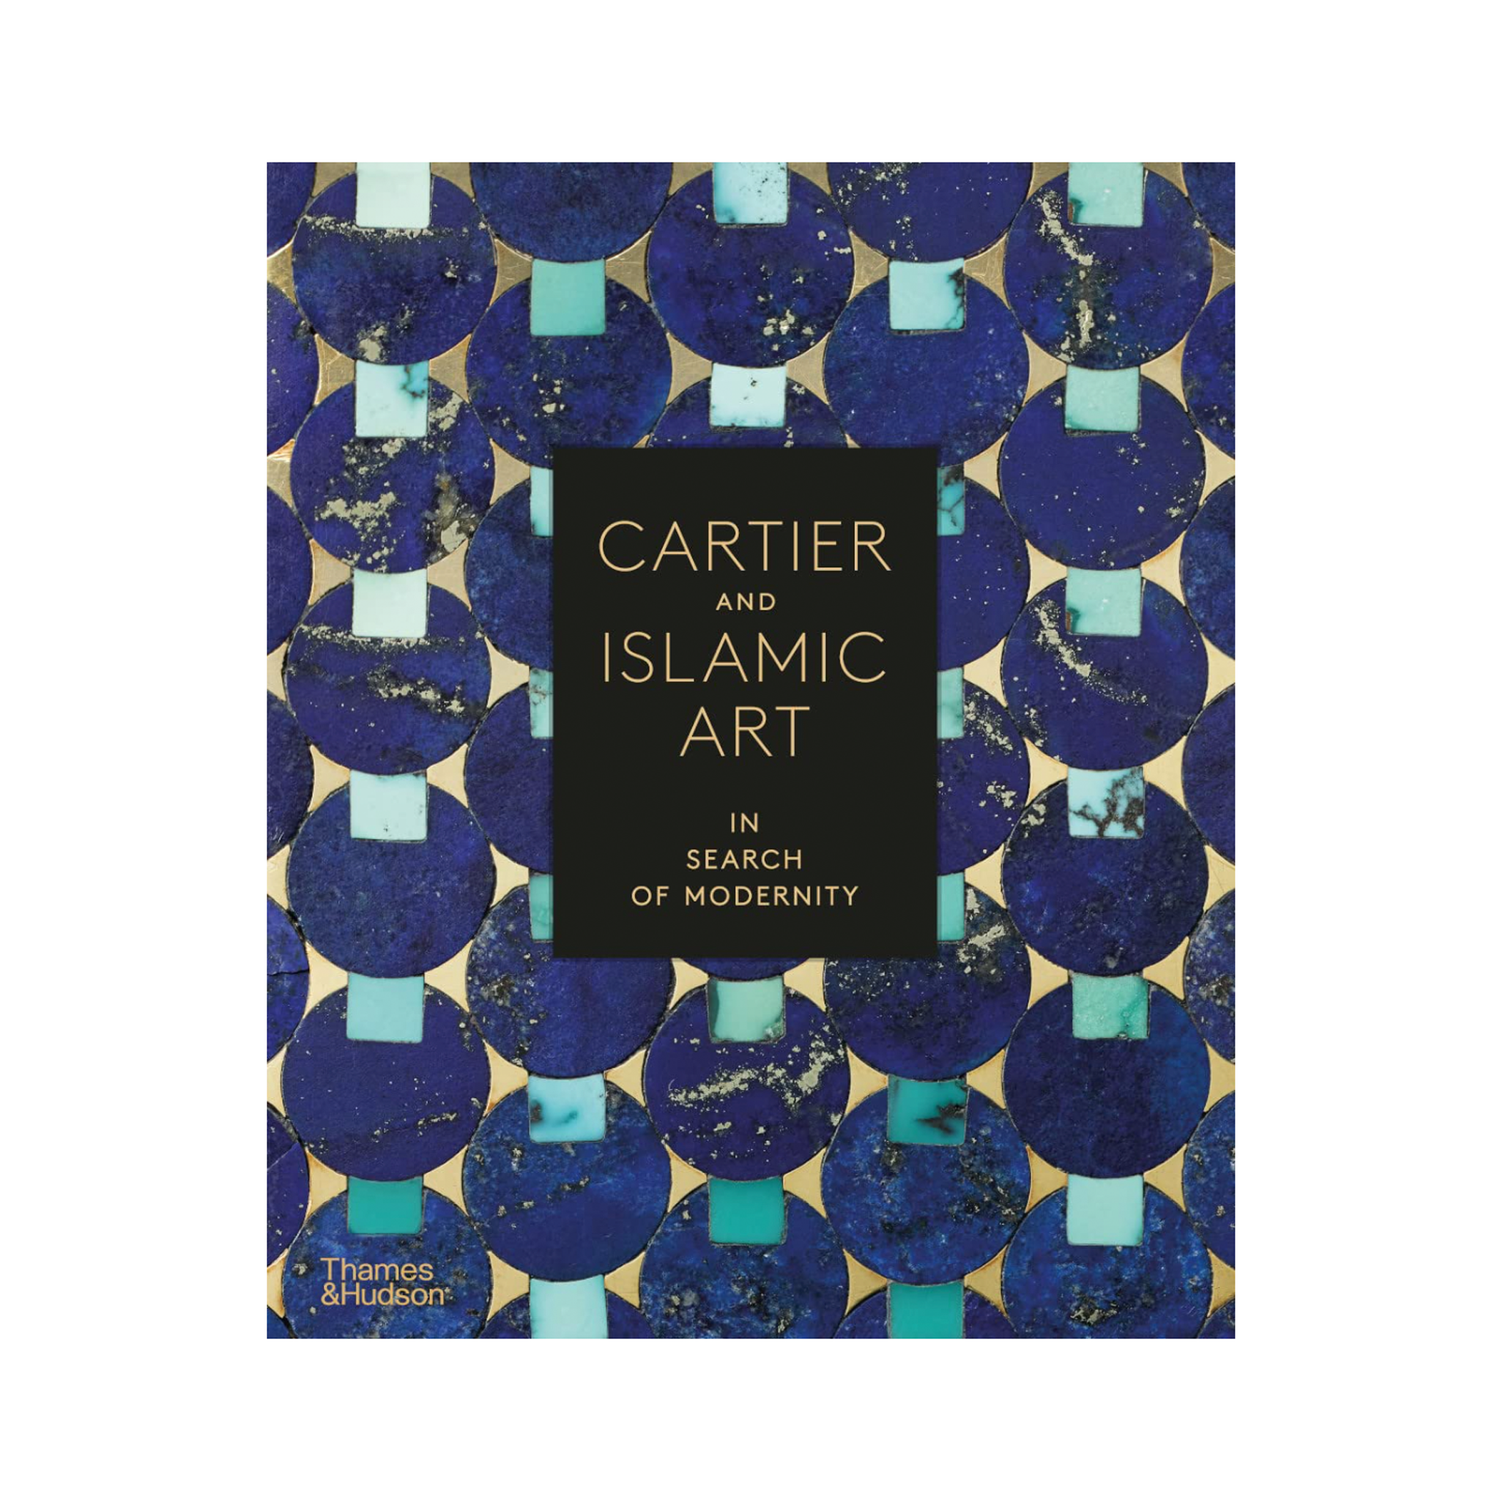 Book Cartier and Islamic Art in Search of Modernity